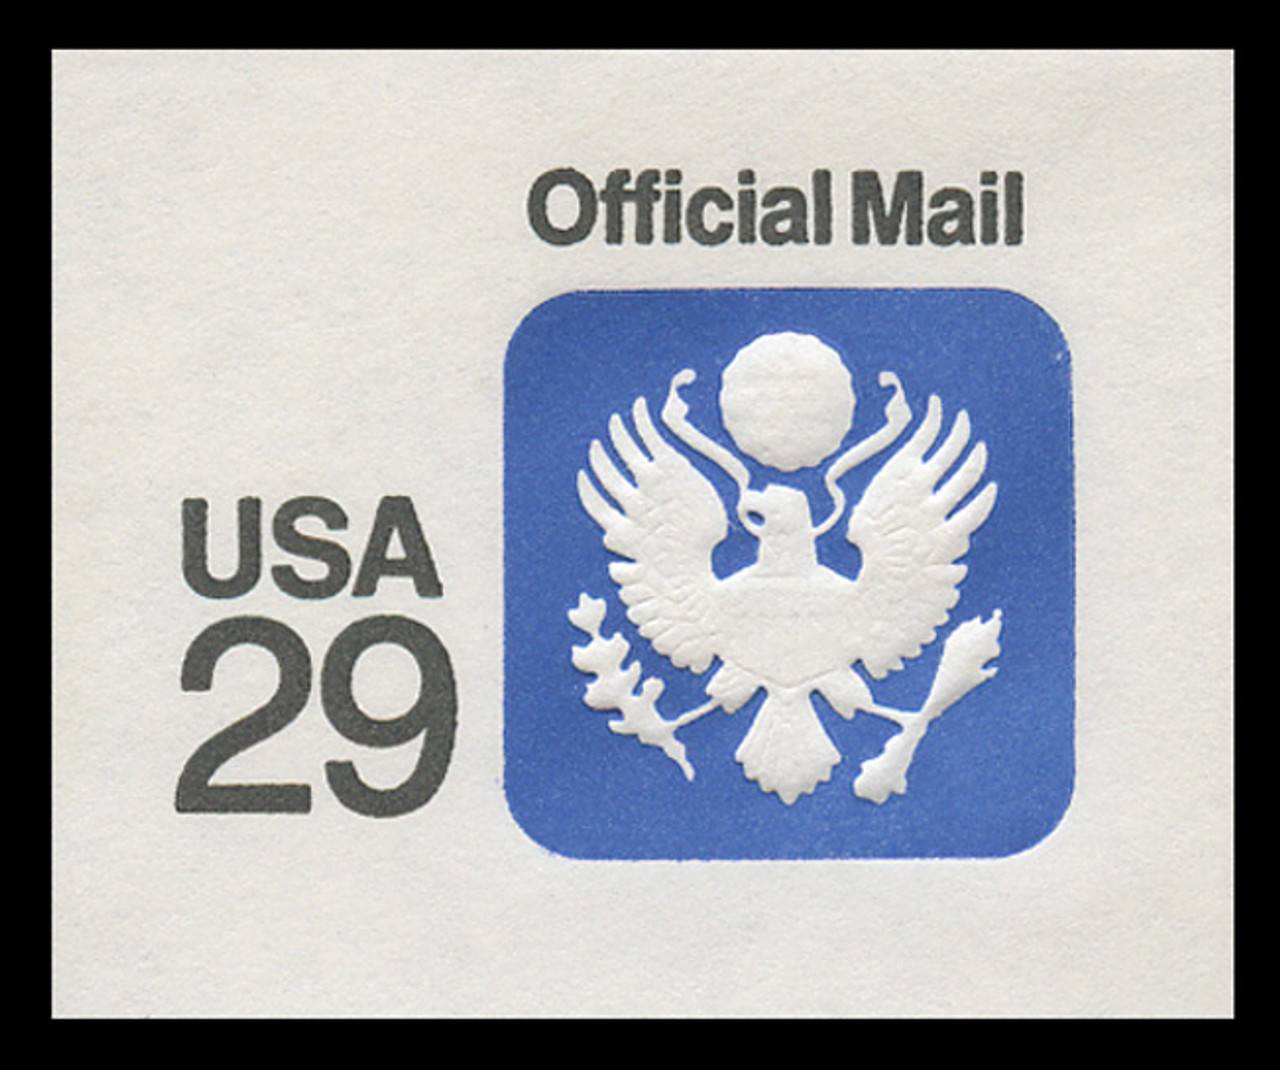 USA Scott # UO  84 1991 29c Official Mail, white background - Mint Cut Square